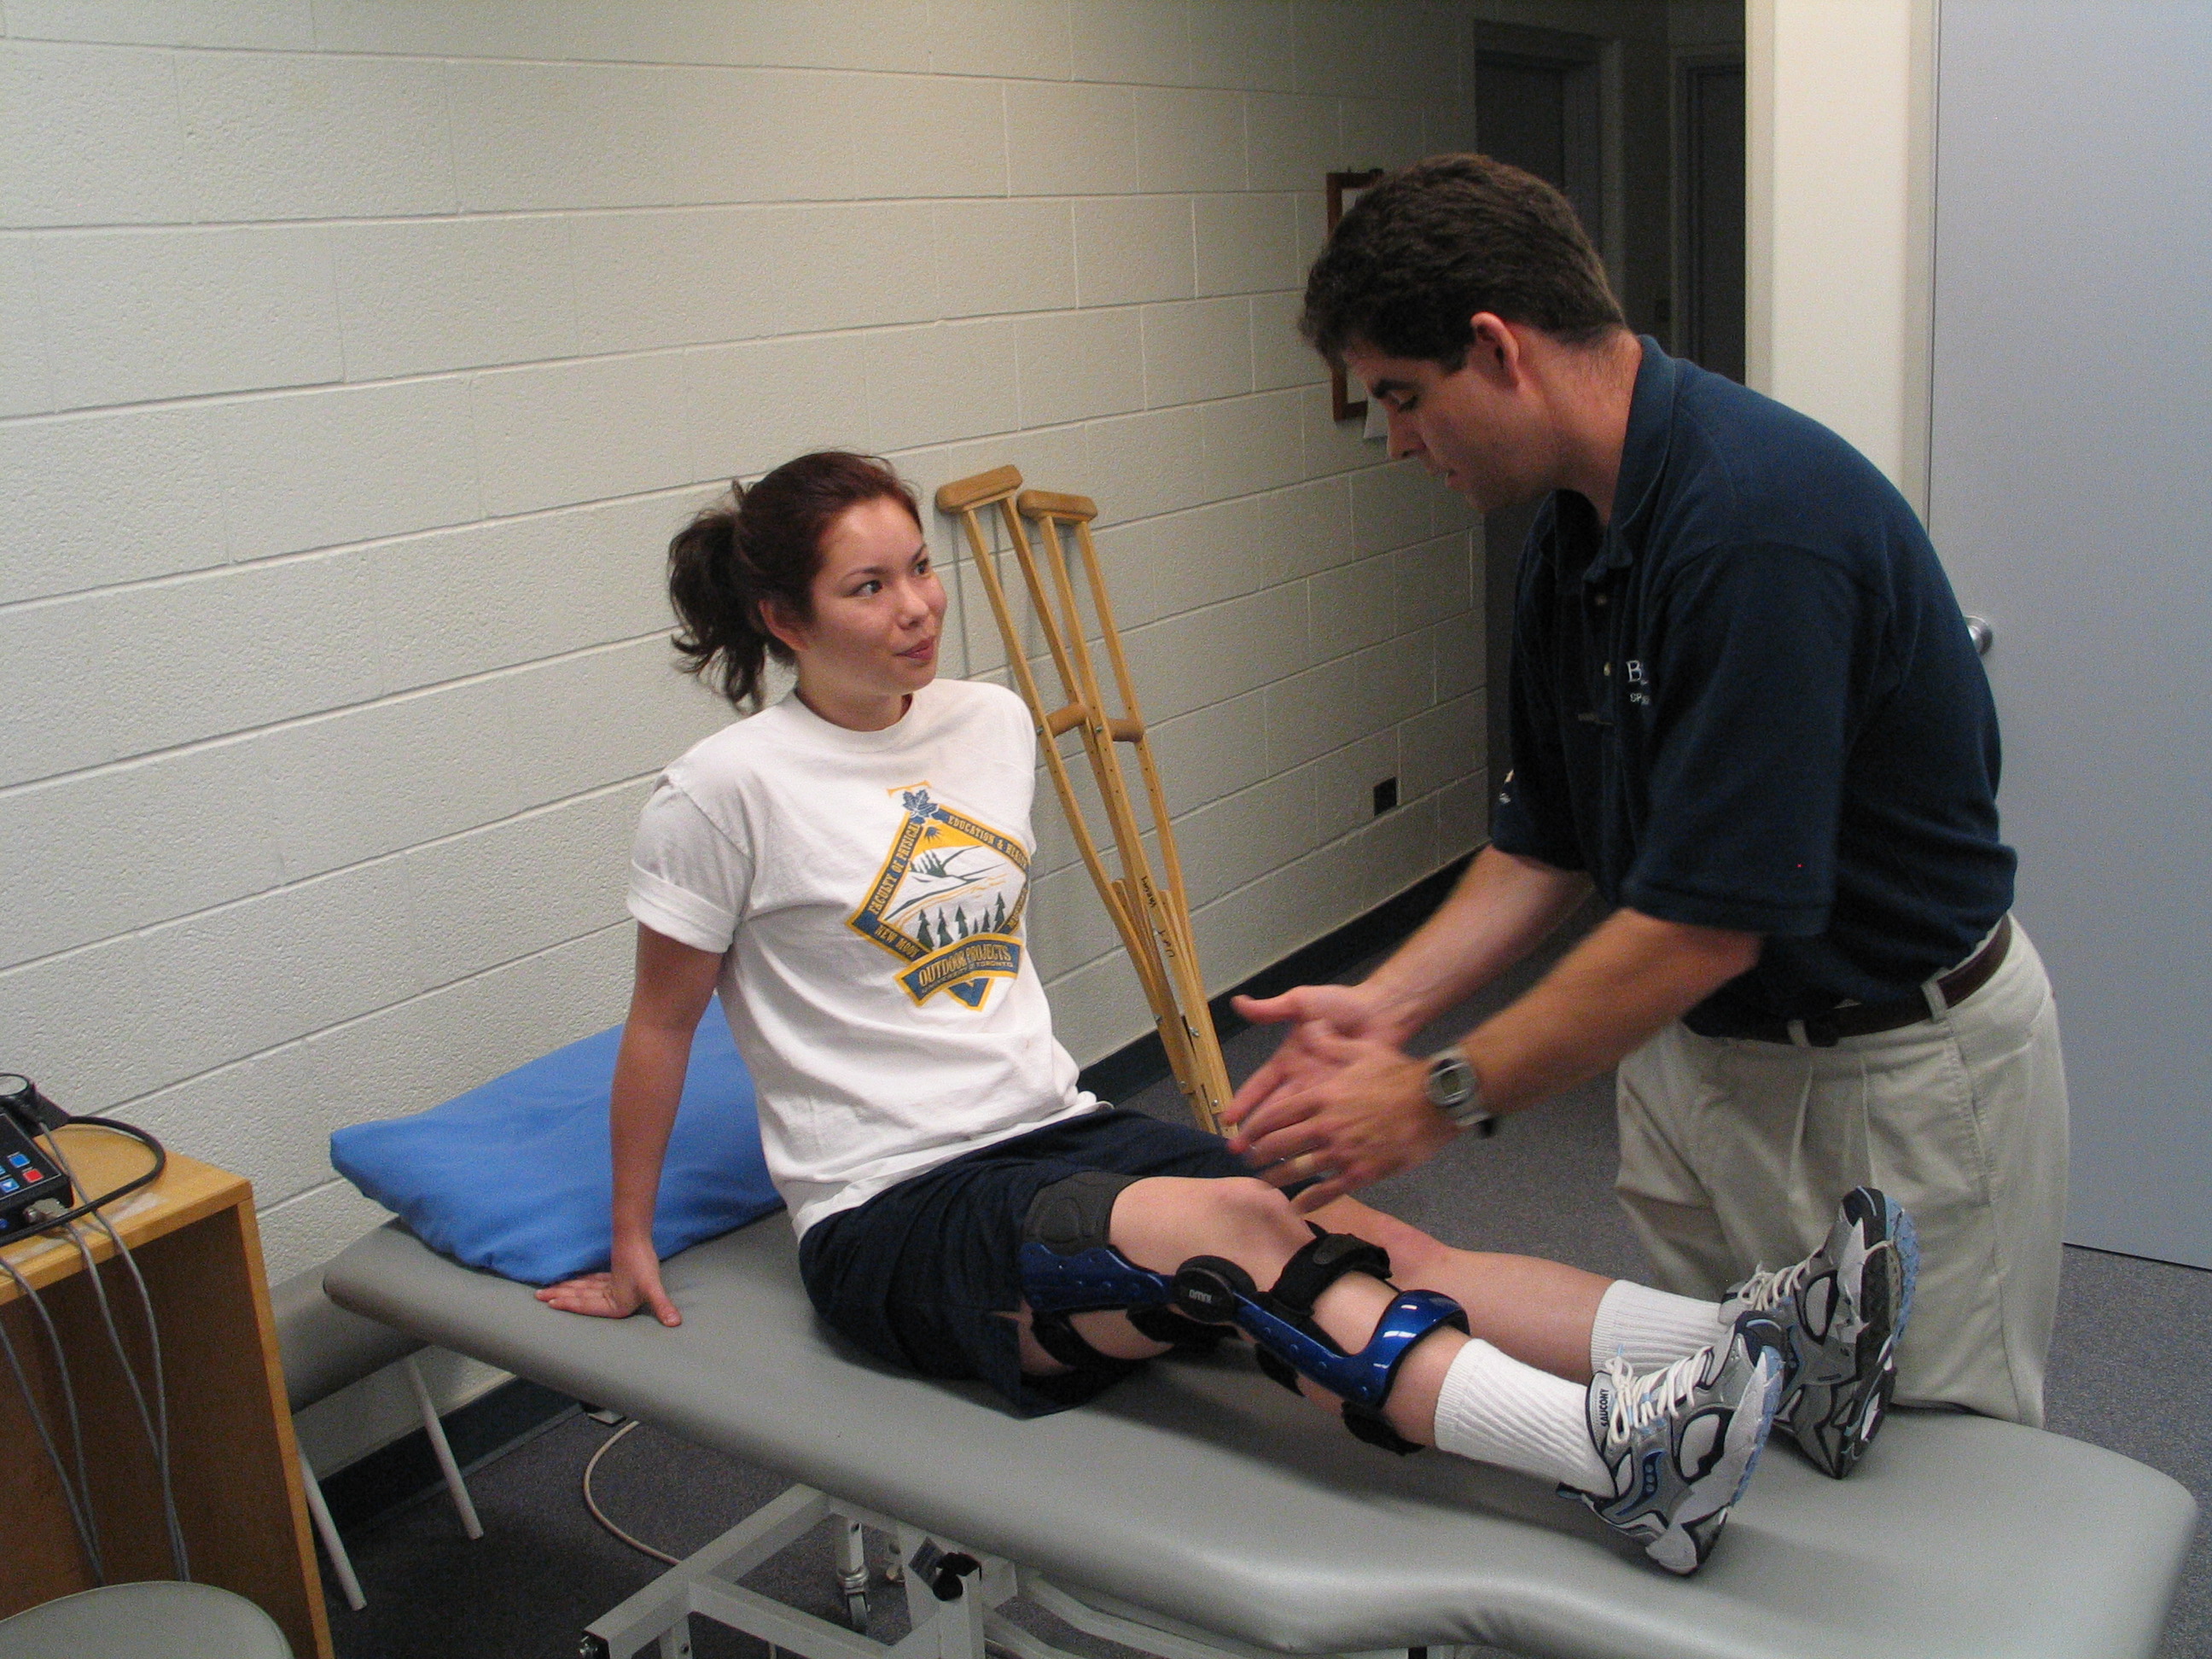 Therapist assists patient with knee brace and treatment in clinic